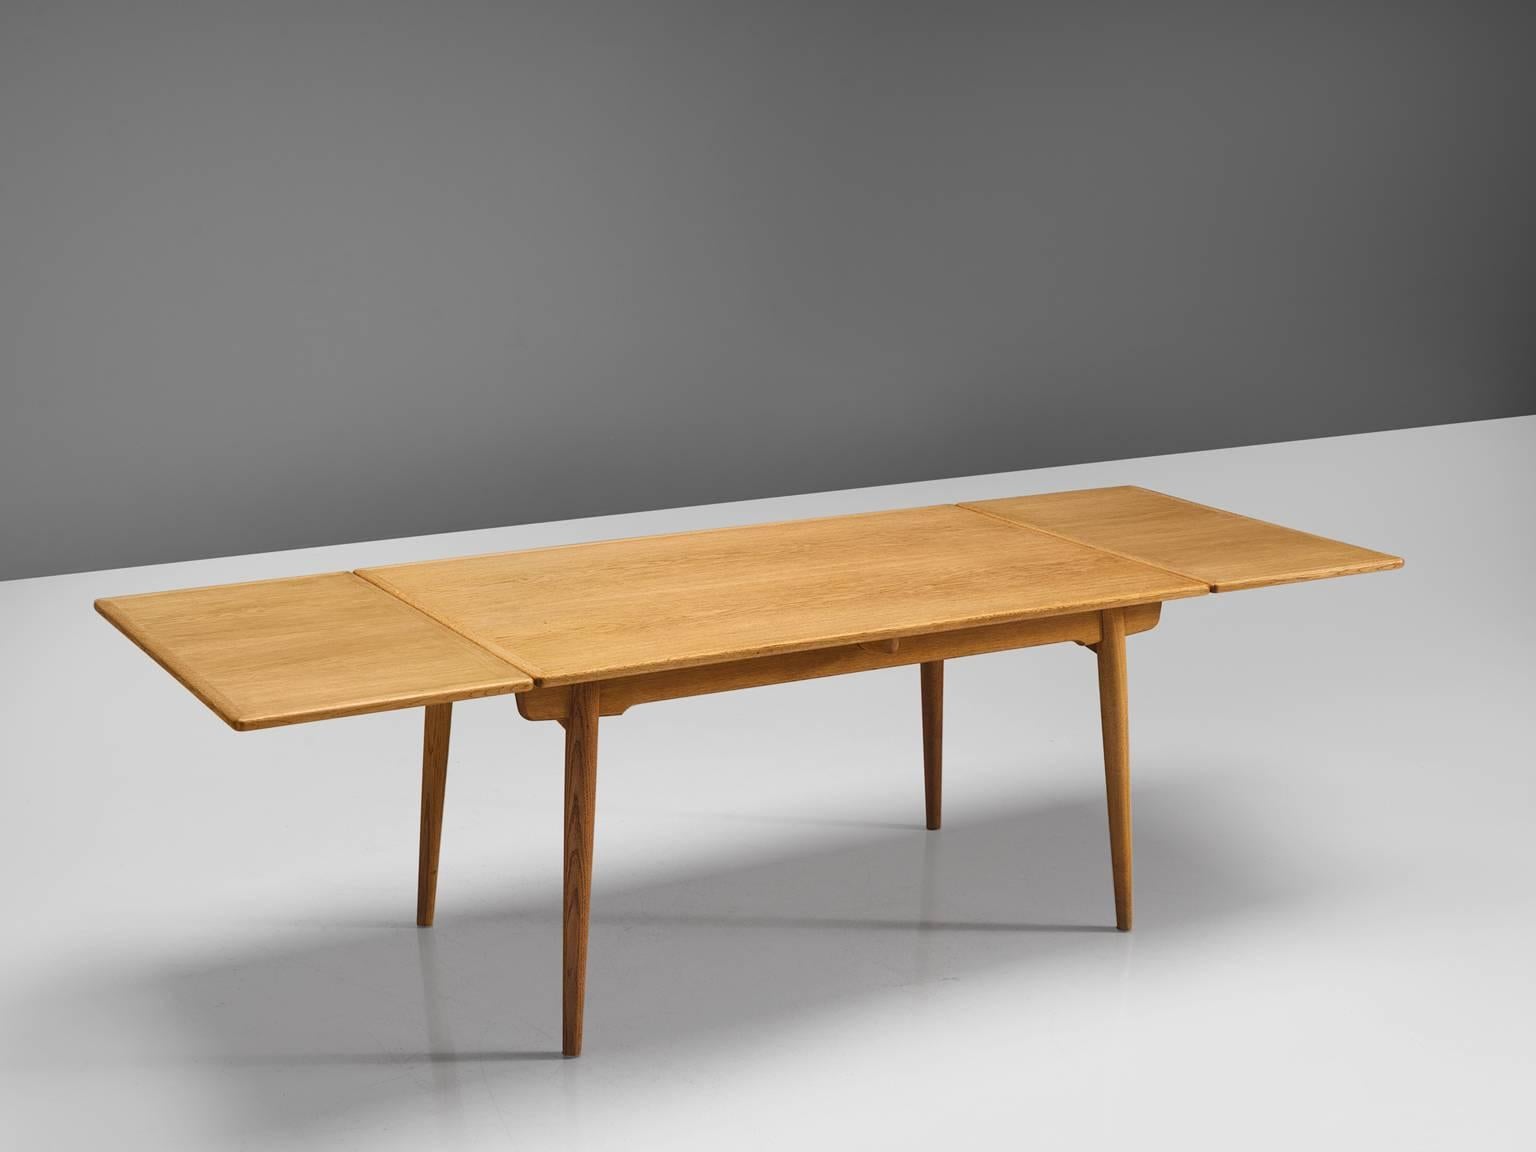 Hans J. Wegner for Andreas Tuck, 'AT-312', teak and oak, Denmark, 1950s.

This extendable AT-312 dining table designed by Hans J. Wegner is made from beech and has extra leaves in order to expand the piece from a six-seat (140cm) to a ten-seat